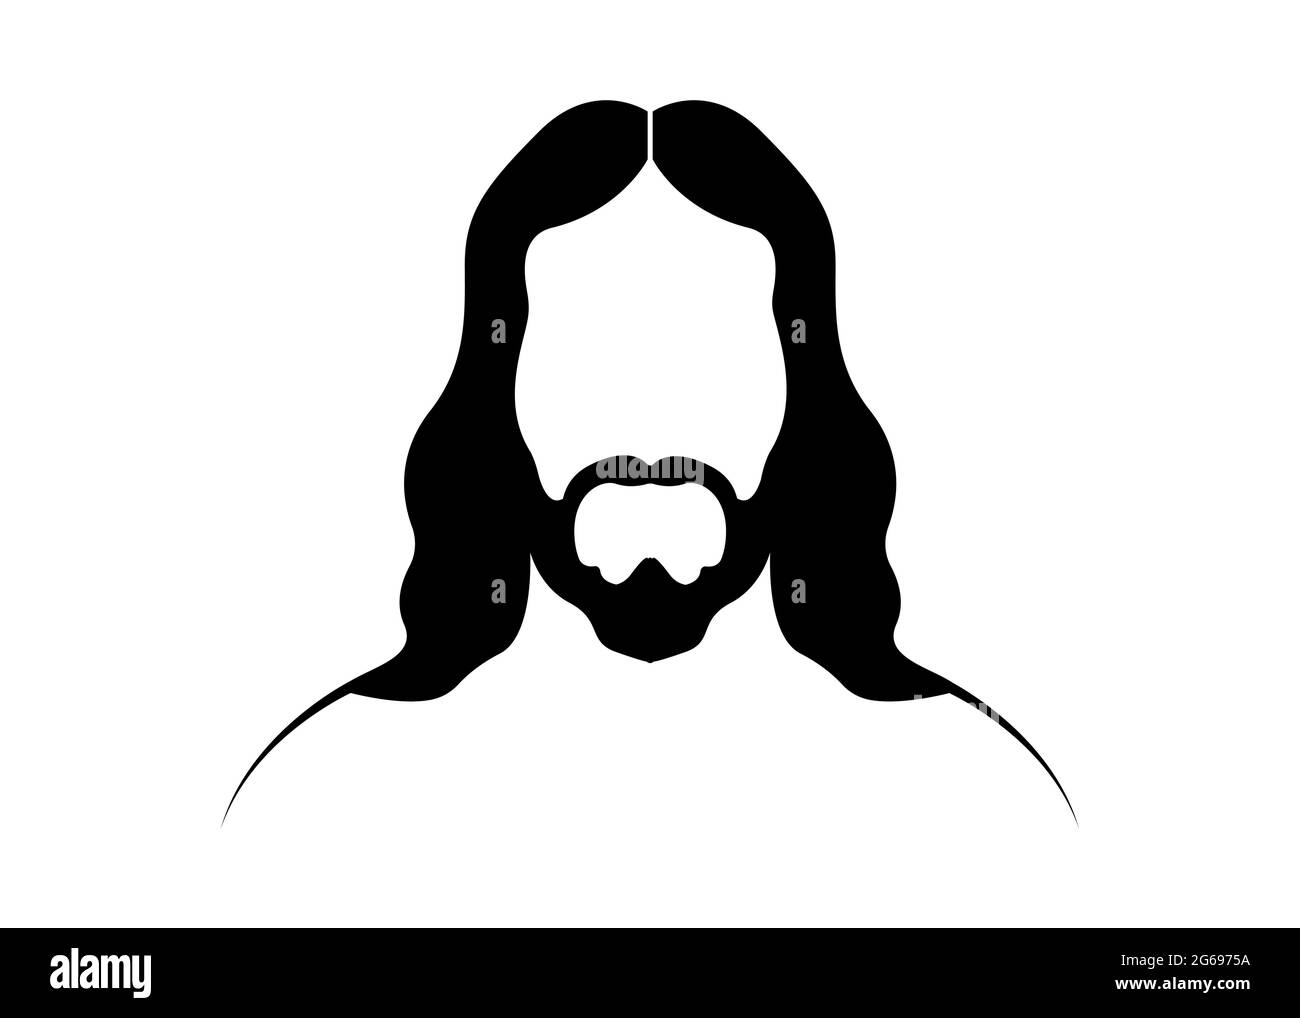 Jesus Christ, graphic portrait vector black silhouette isolated on white background Stock Vector